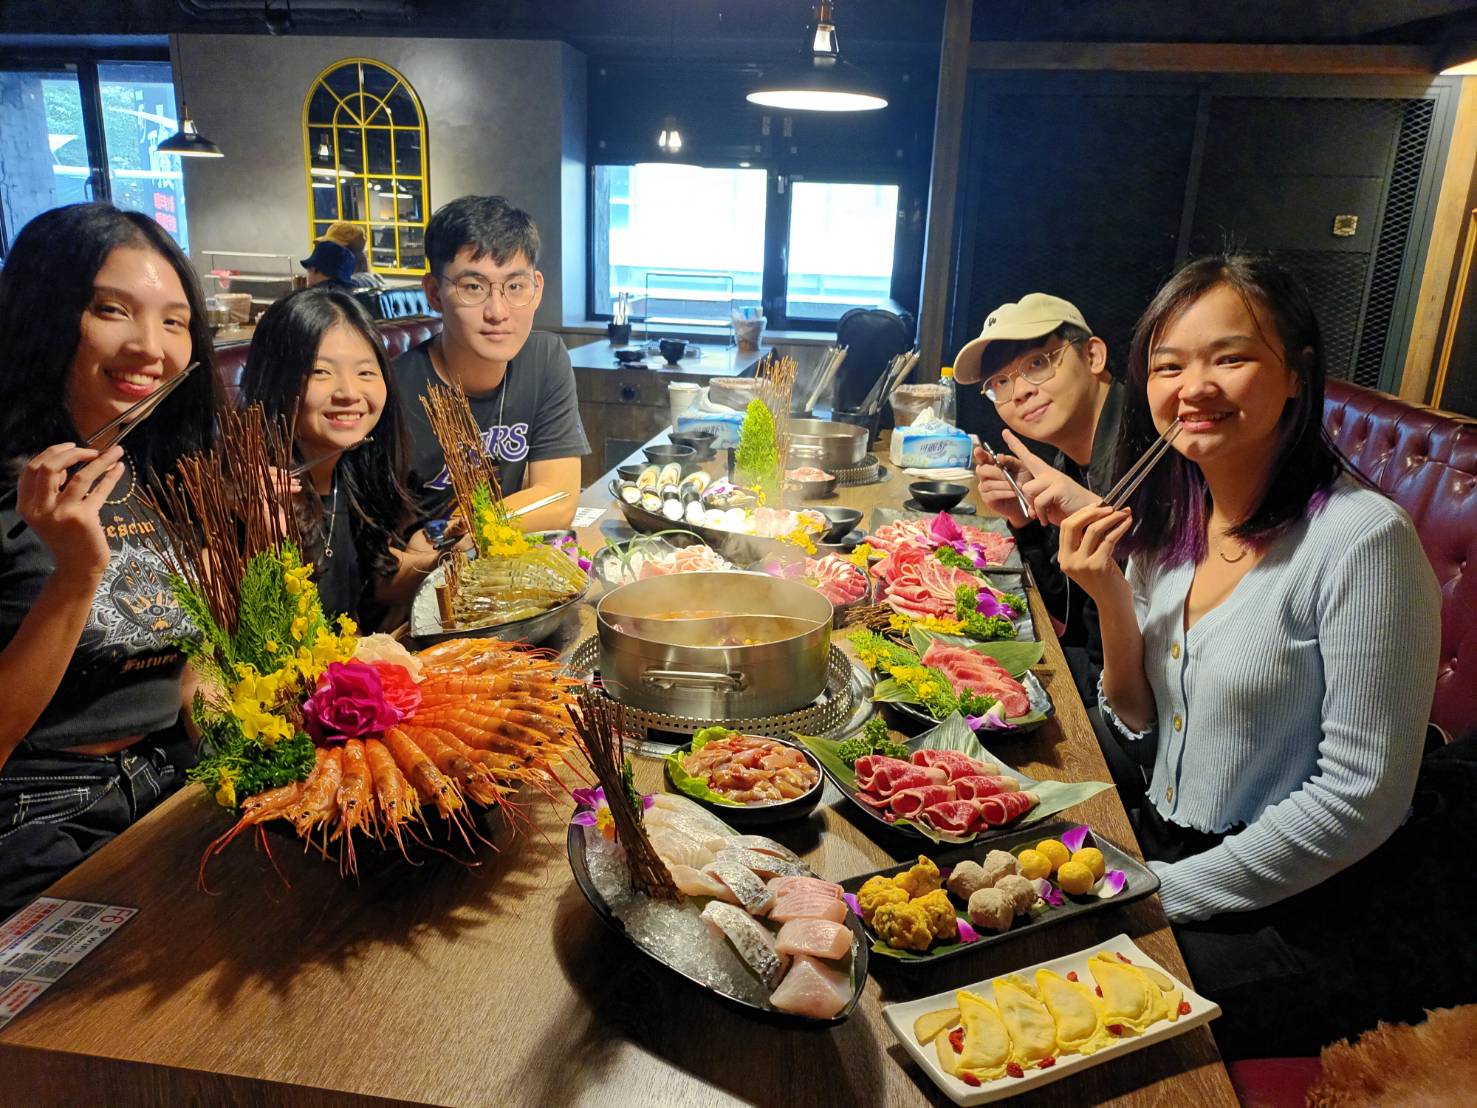 New immigrants from Indonesia who were unable to return their hometown have hot pot for New Year’s Eve dinner.